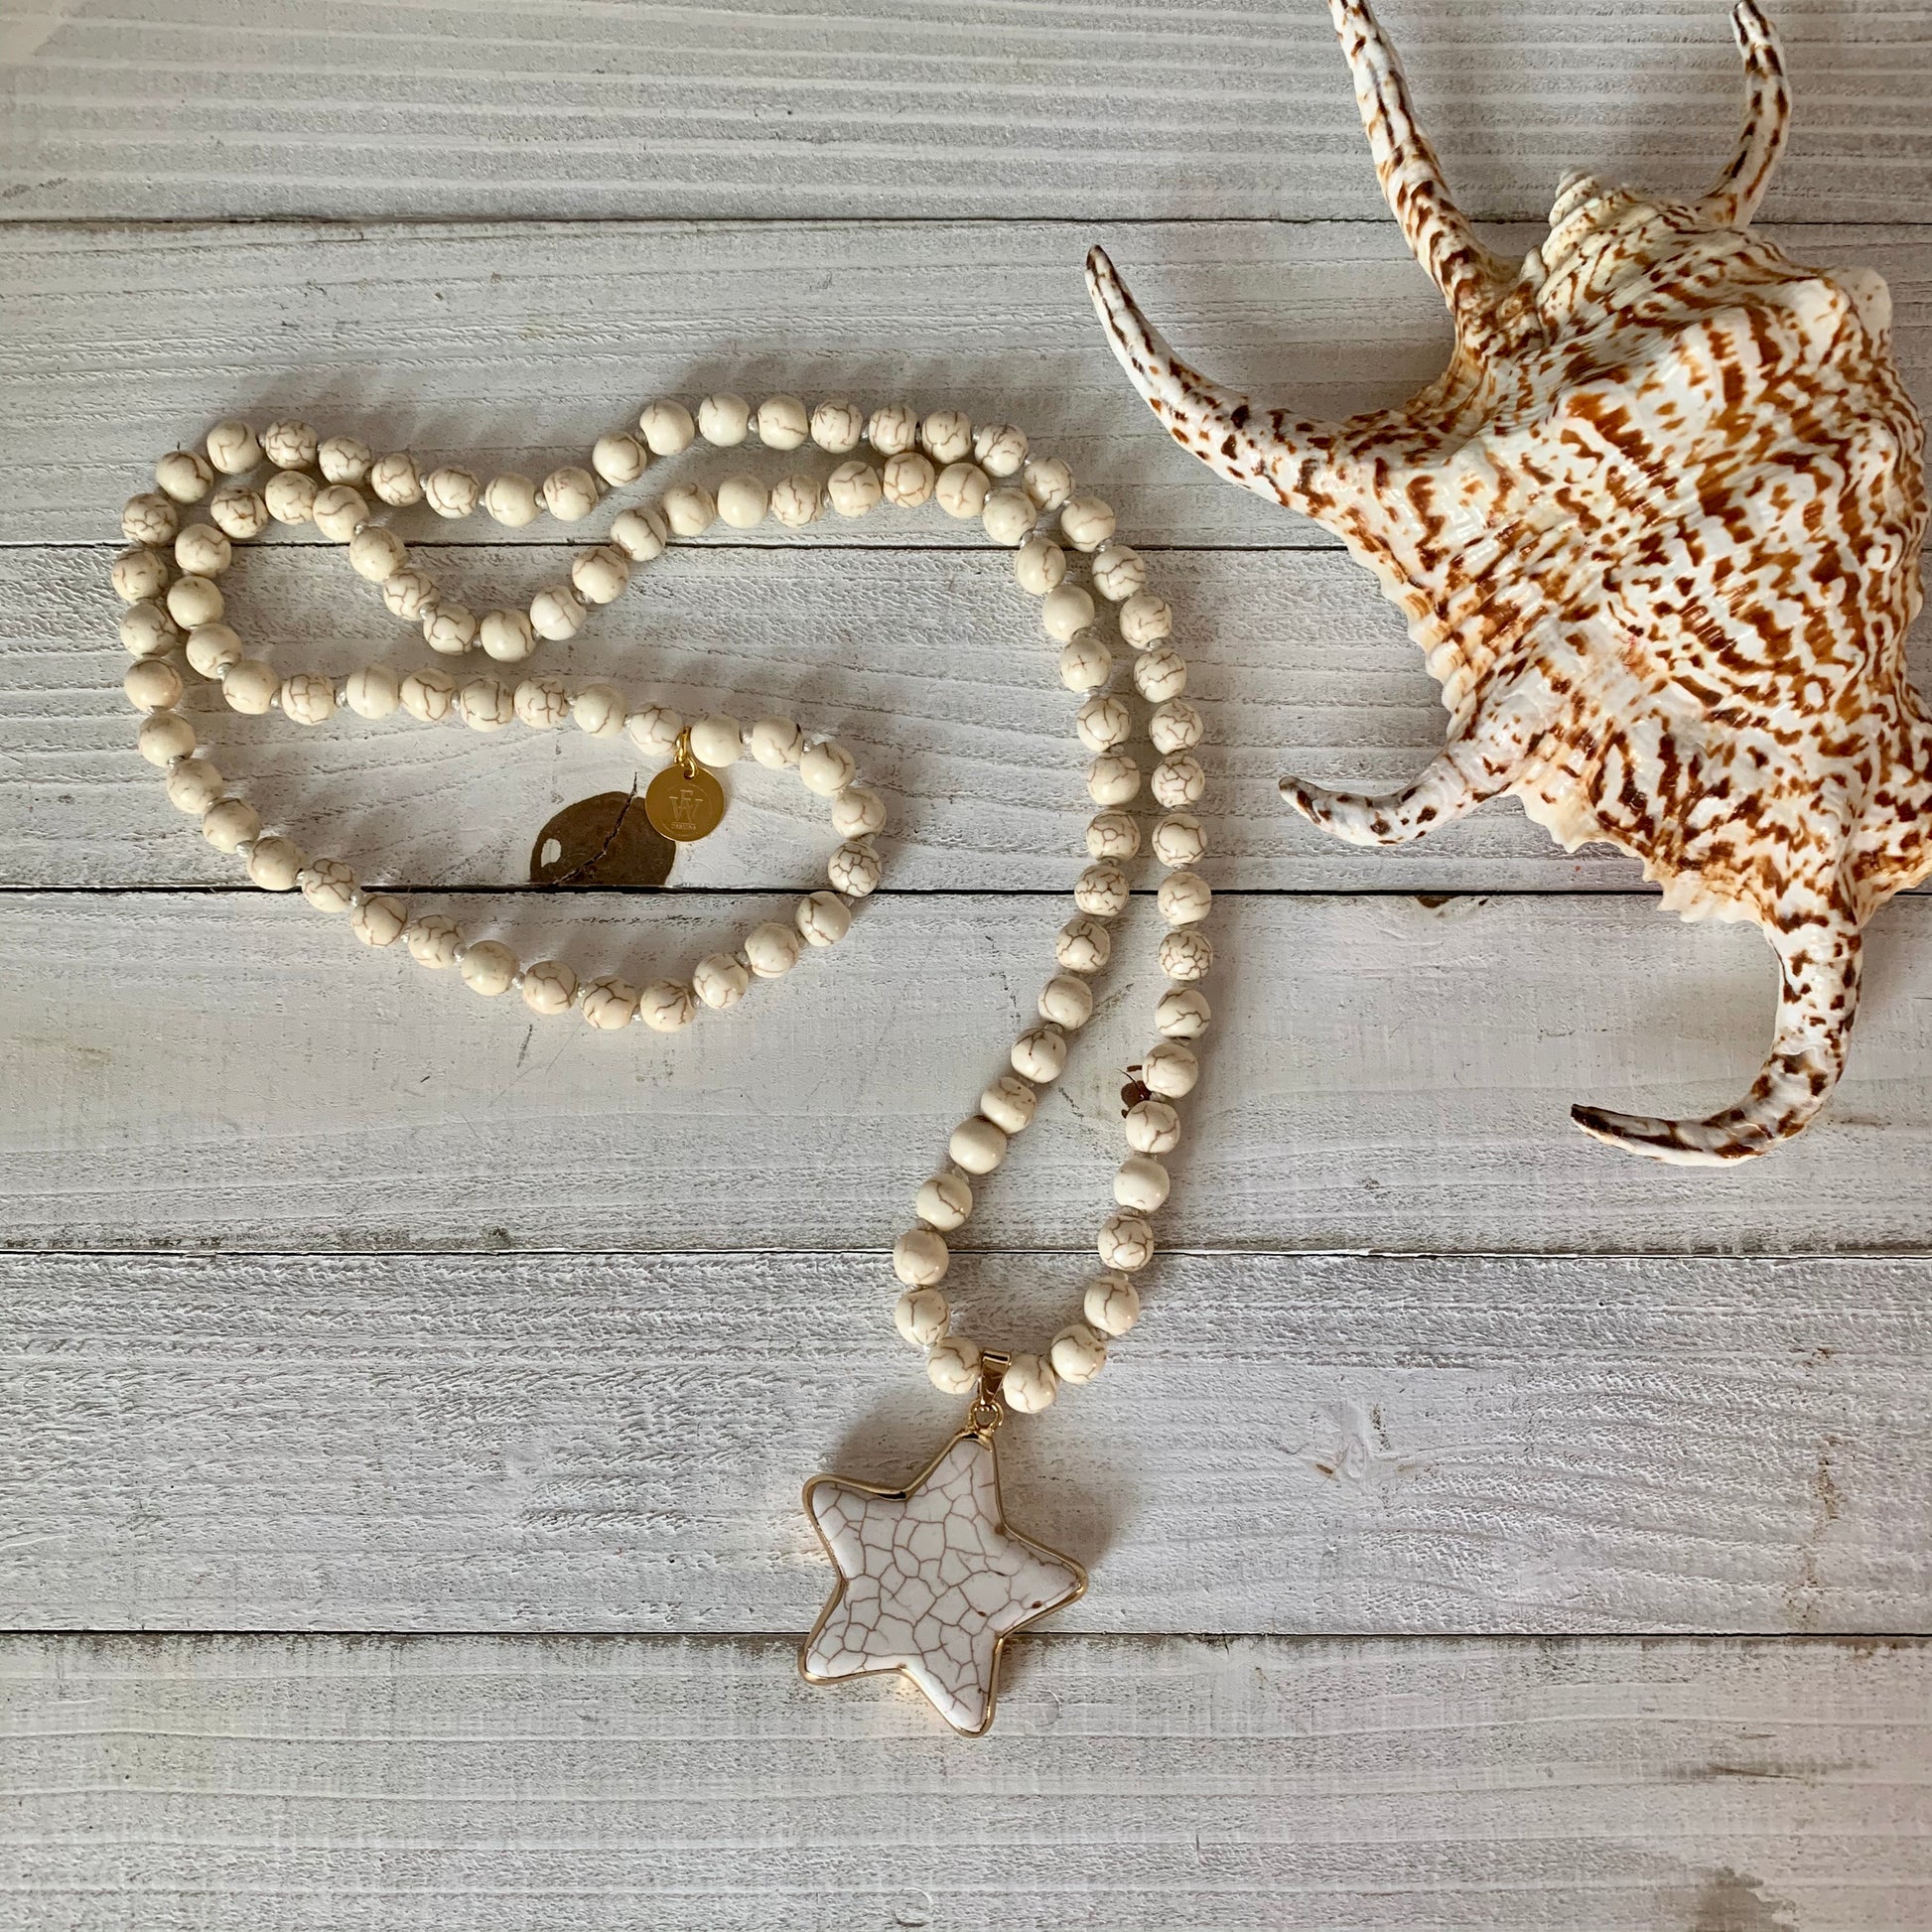 Necklace made out of White  Magnesite Beads and it has a Lone Star Shape Pendant